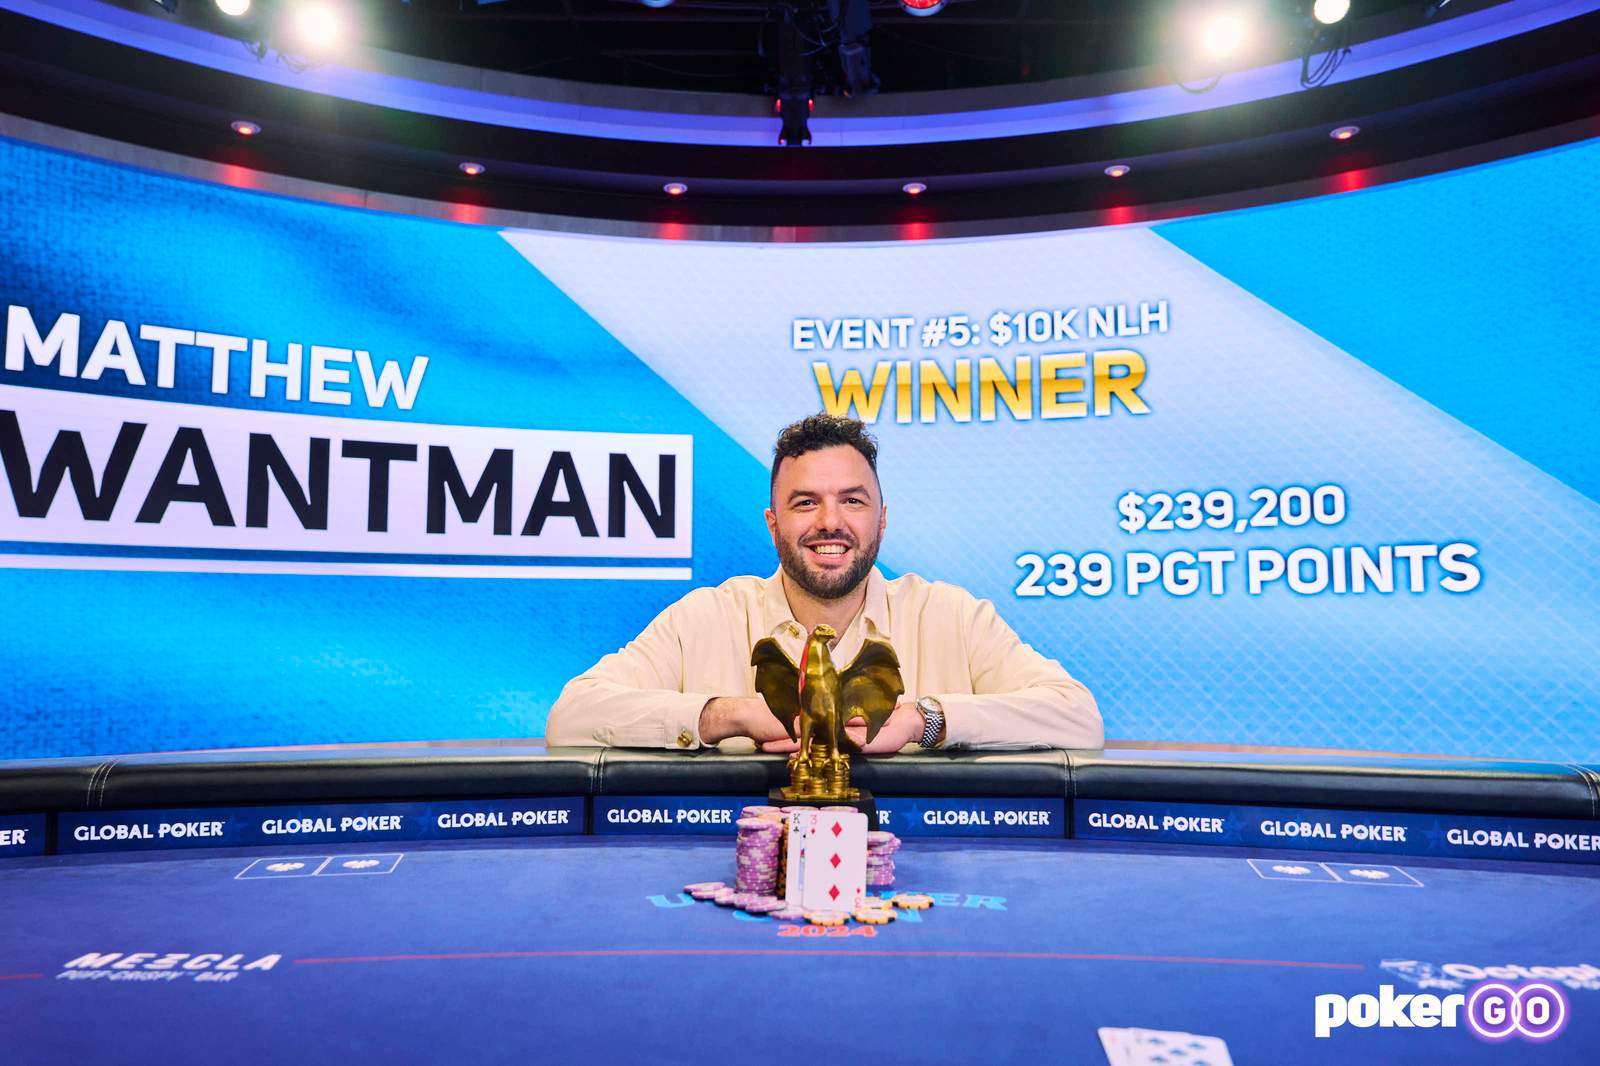 Matthew Wantman Goes From Worst to First, Captures Event #5: $10,100 No-Limit Hold'em Title